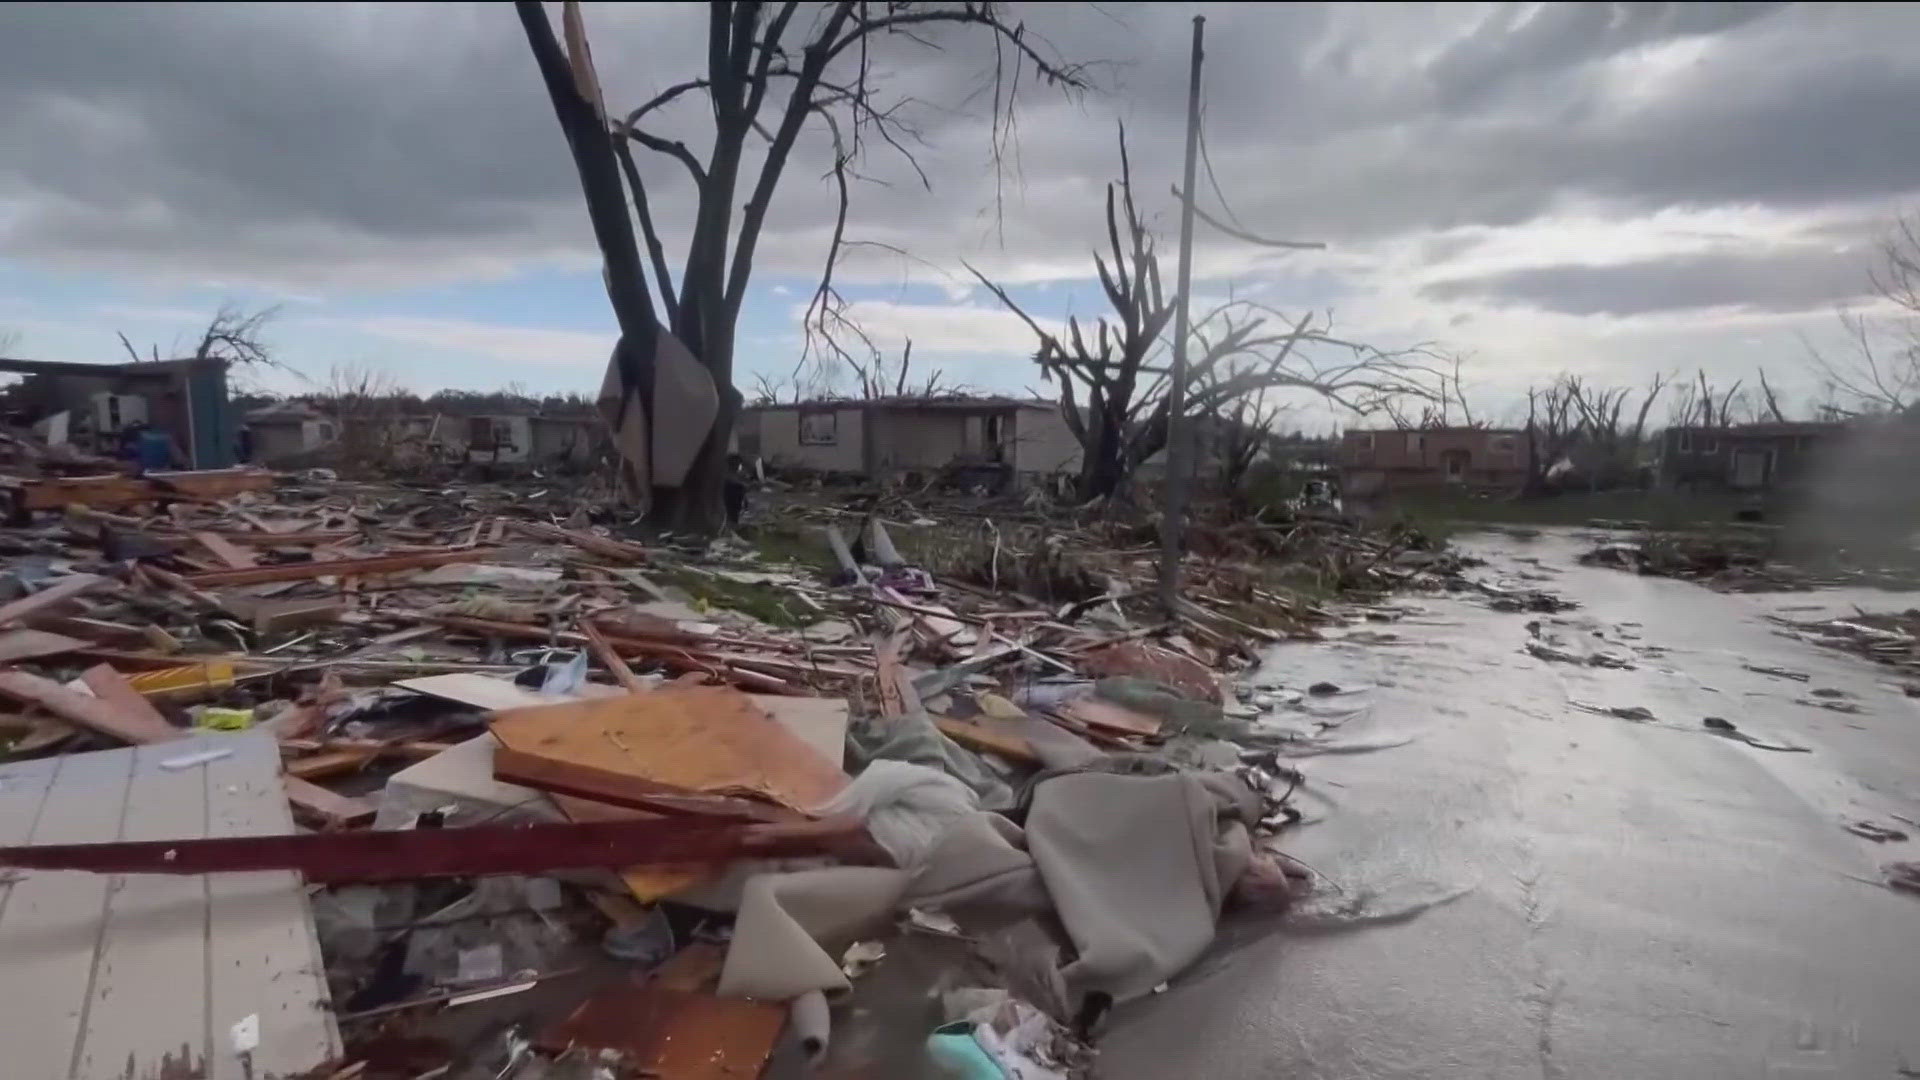 The National Weather Service is evaluating how many tornadoes touched down.